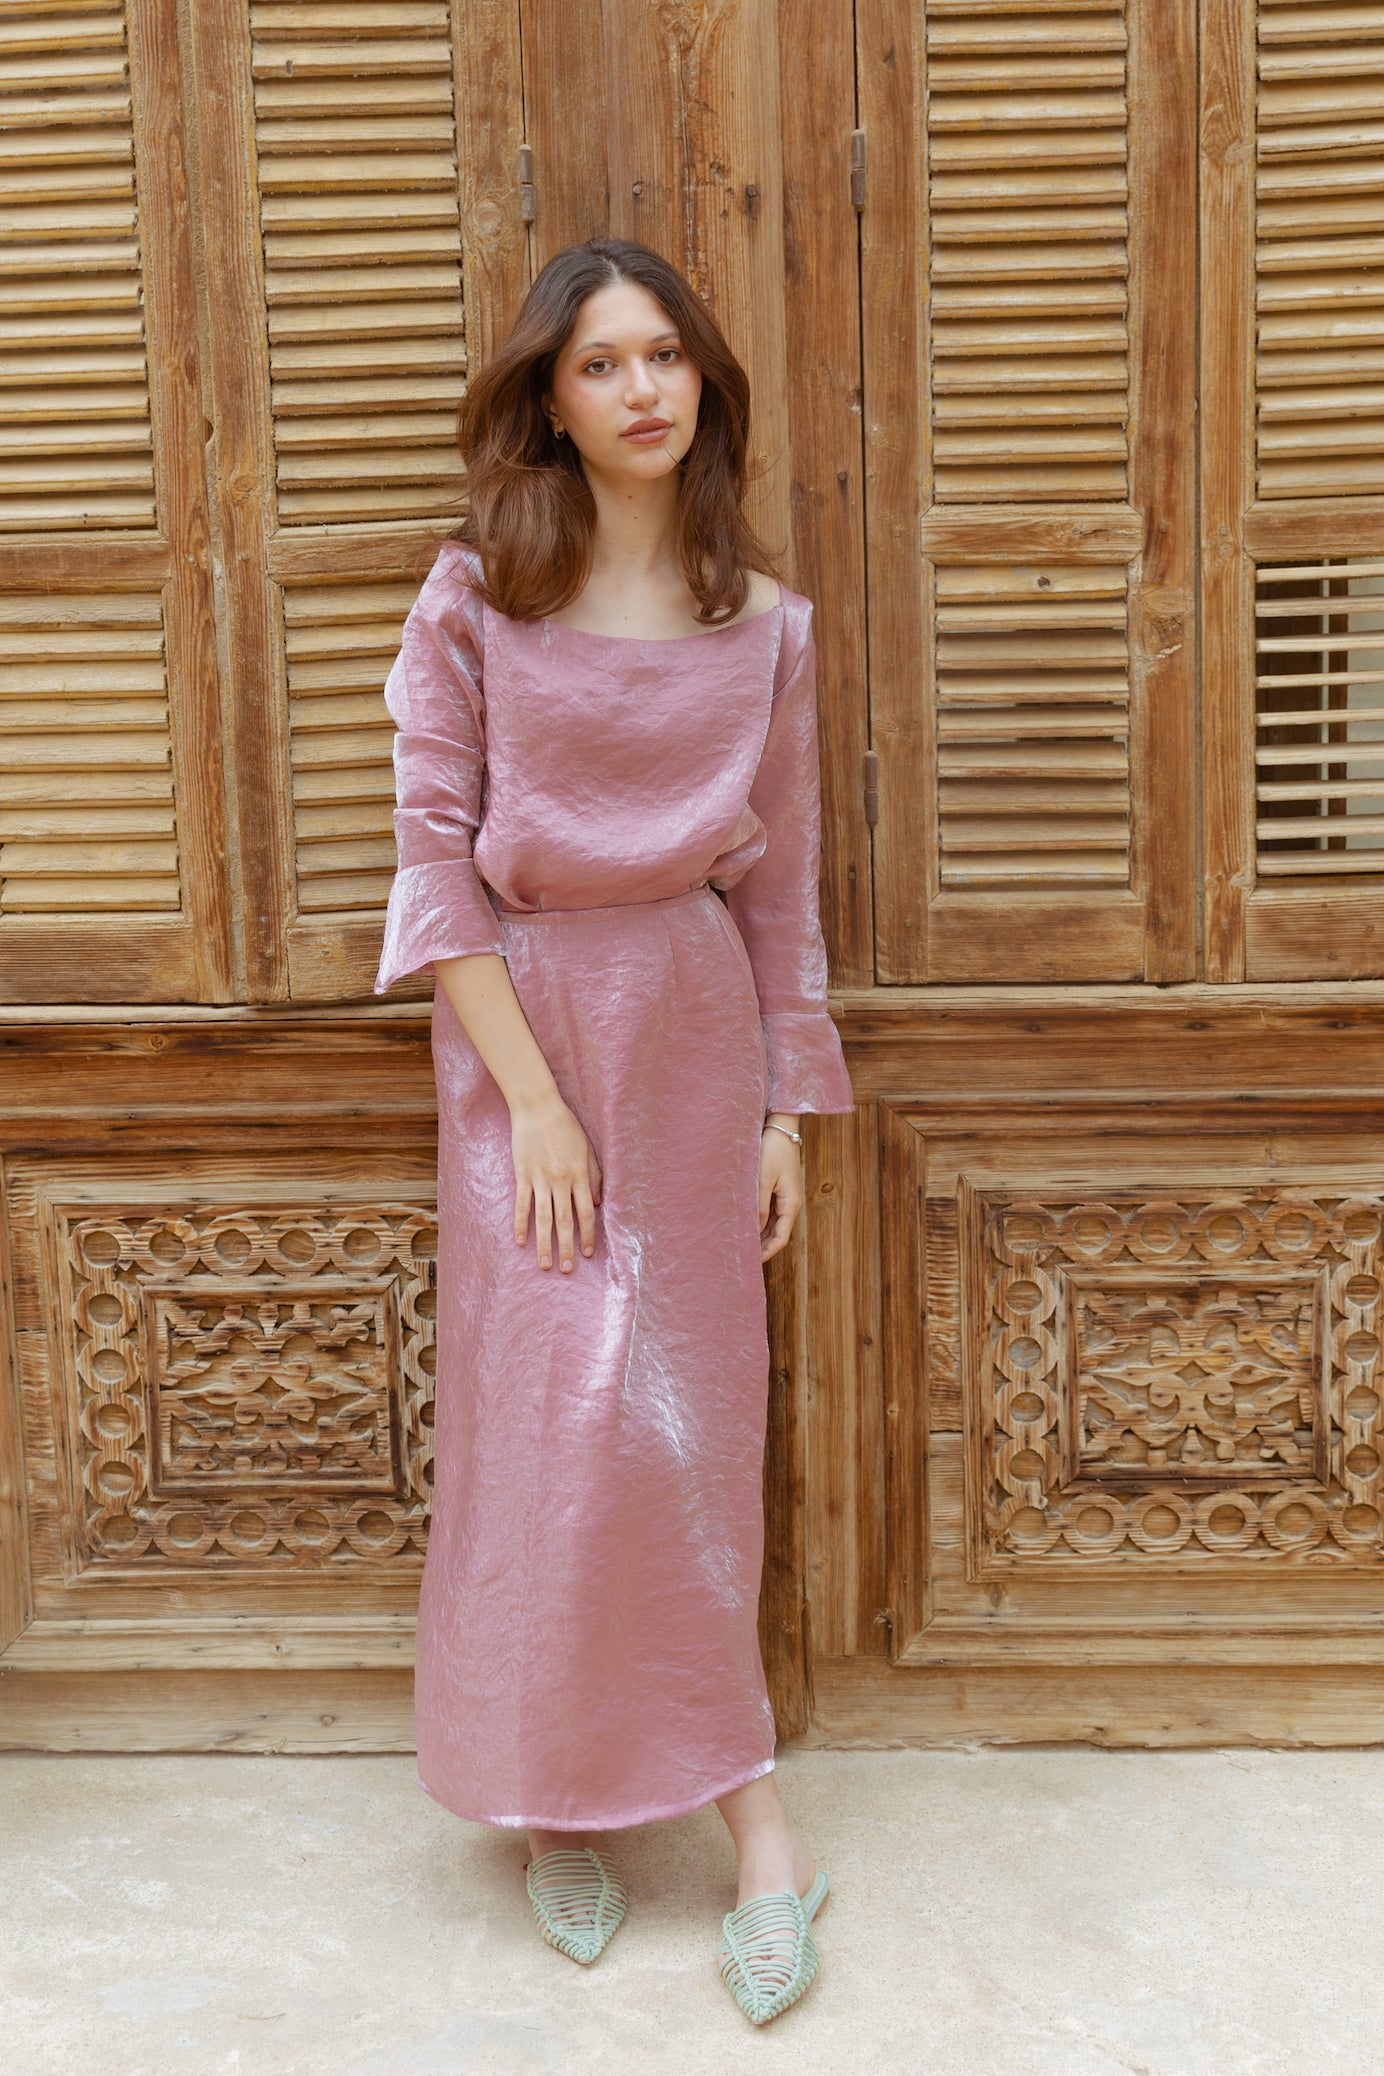 Shimmery maxi skirt in pink